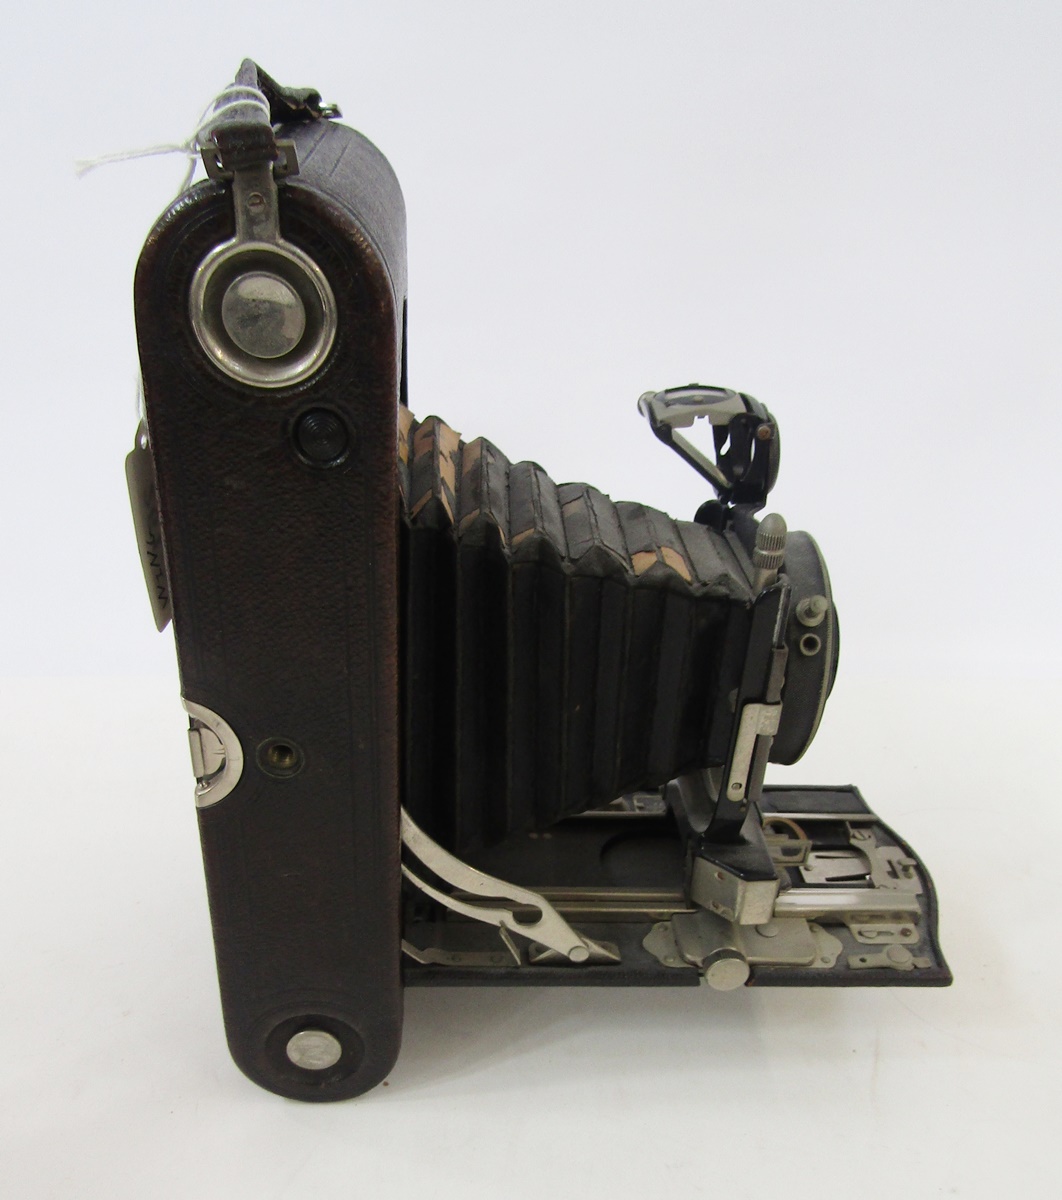 Kodak 3A autographic special model B range finder camera, 34586, with Velosto no 1A lens, patent - Image 2 of 4